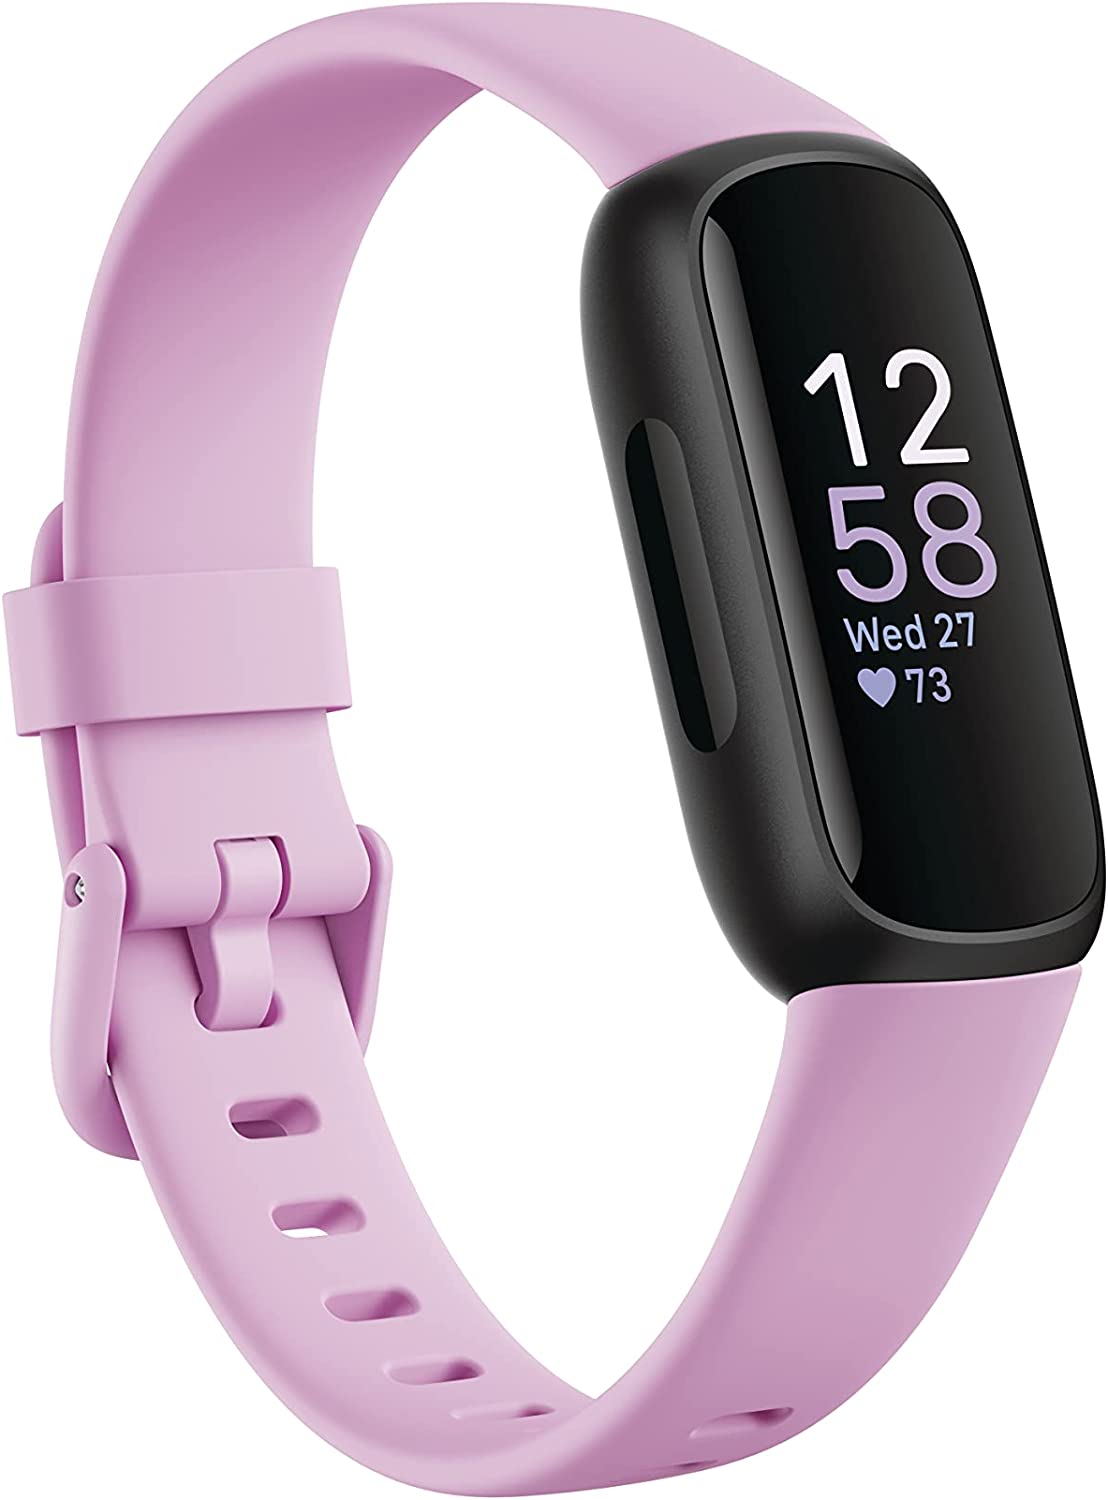 Fitbit Inspire 3 Health &amp; Fitness Tracker with Stress Management - Lilac Bliss (New)